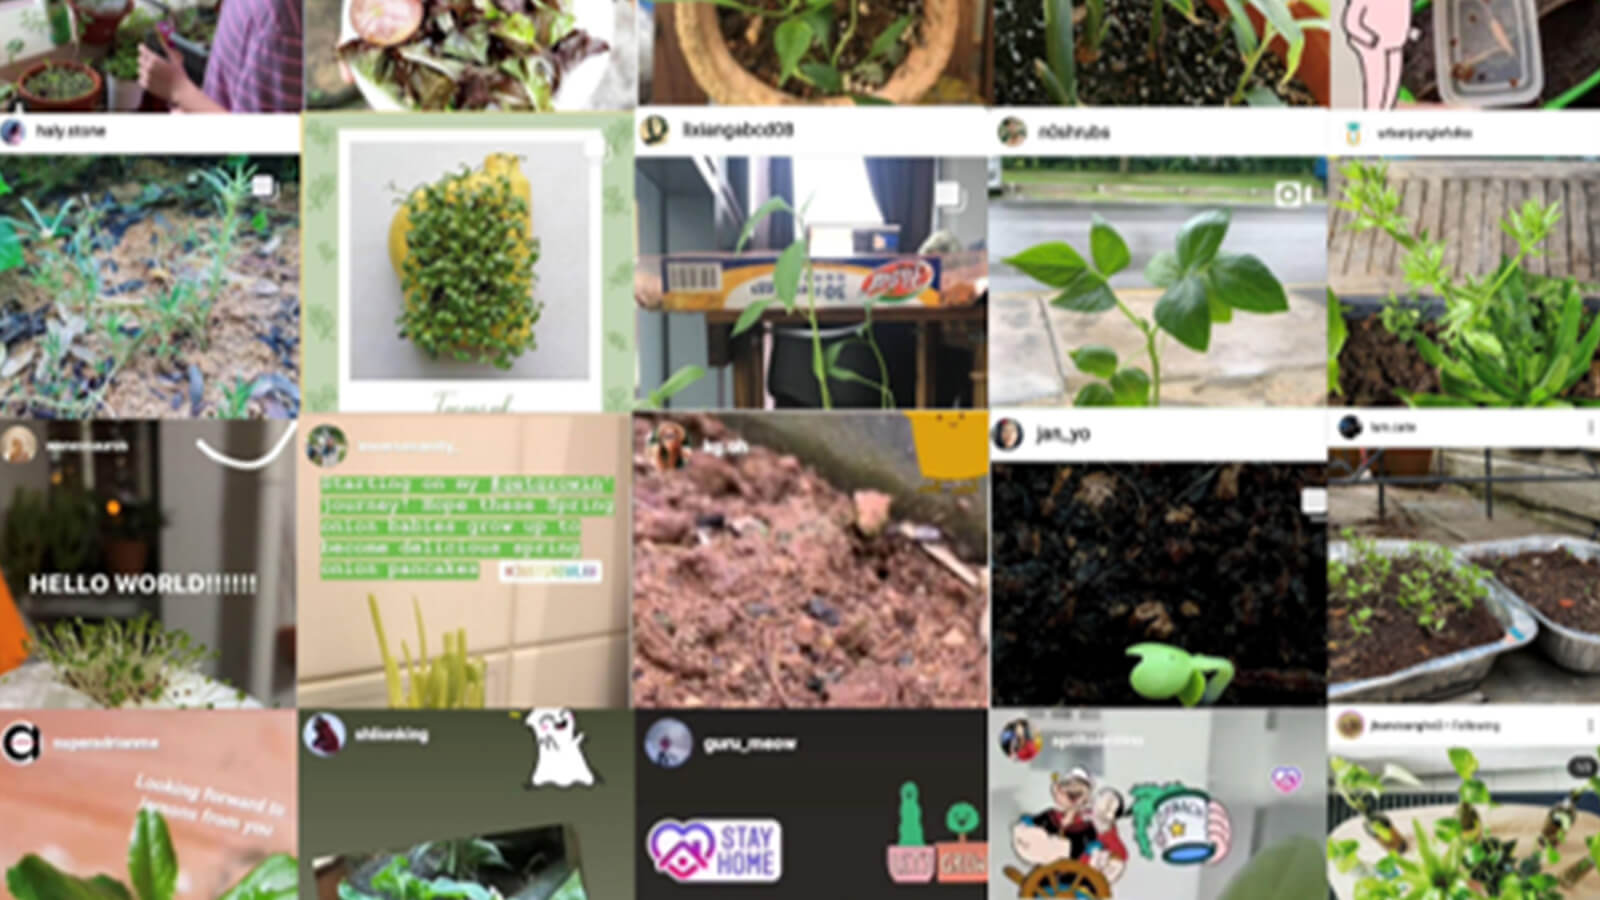 ‘Get Growin’ Instagram challenge to encourage people to grow edible crops in their own homes